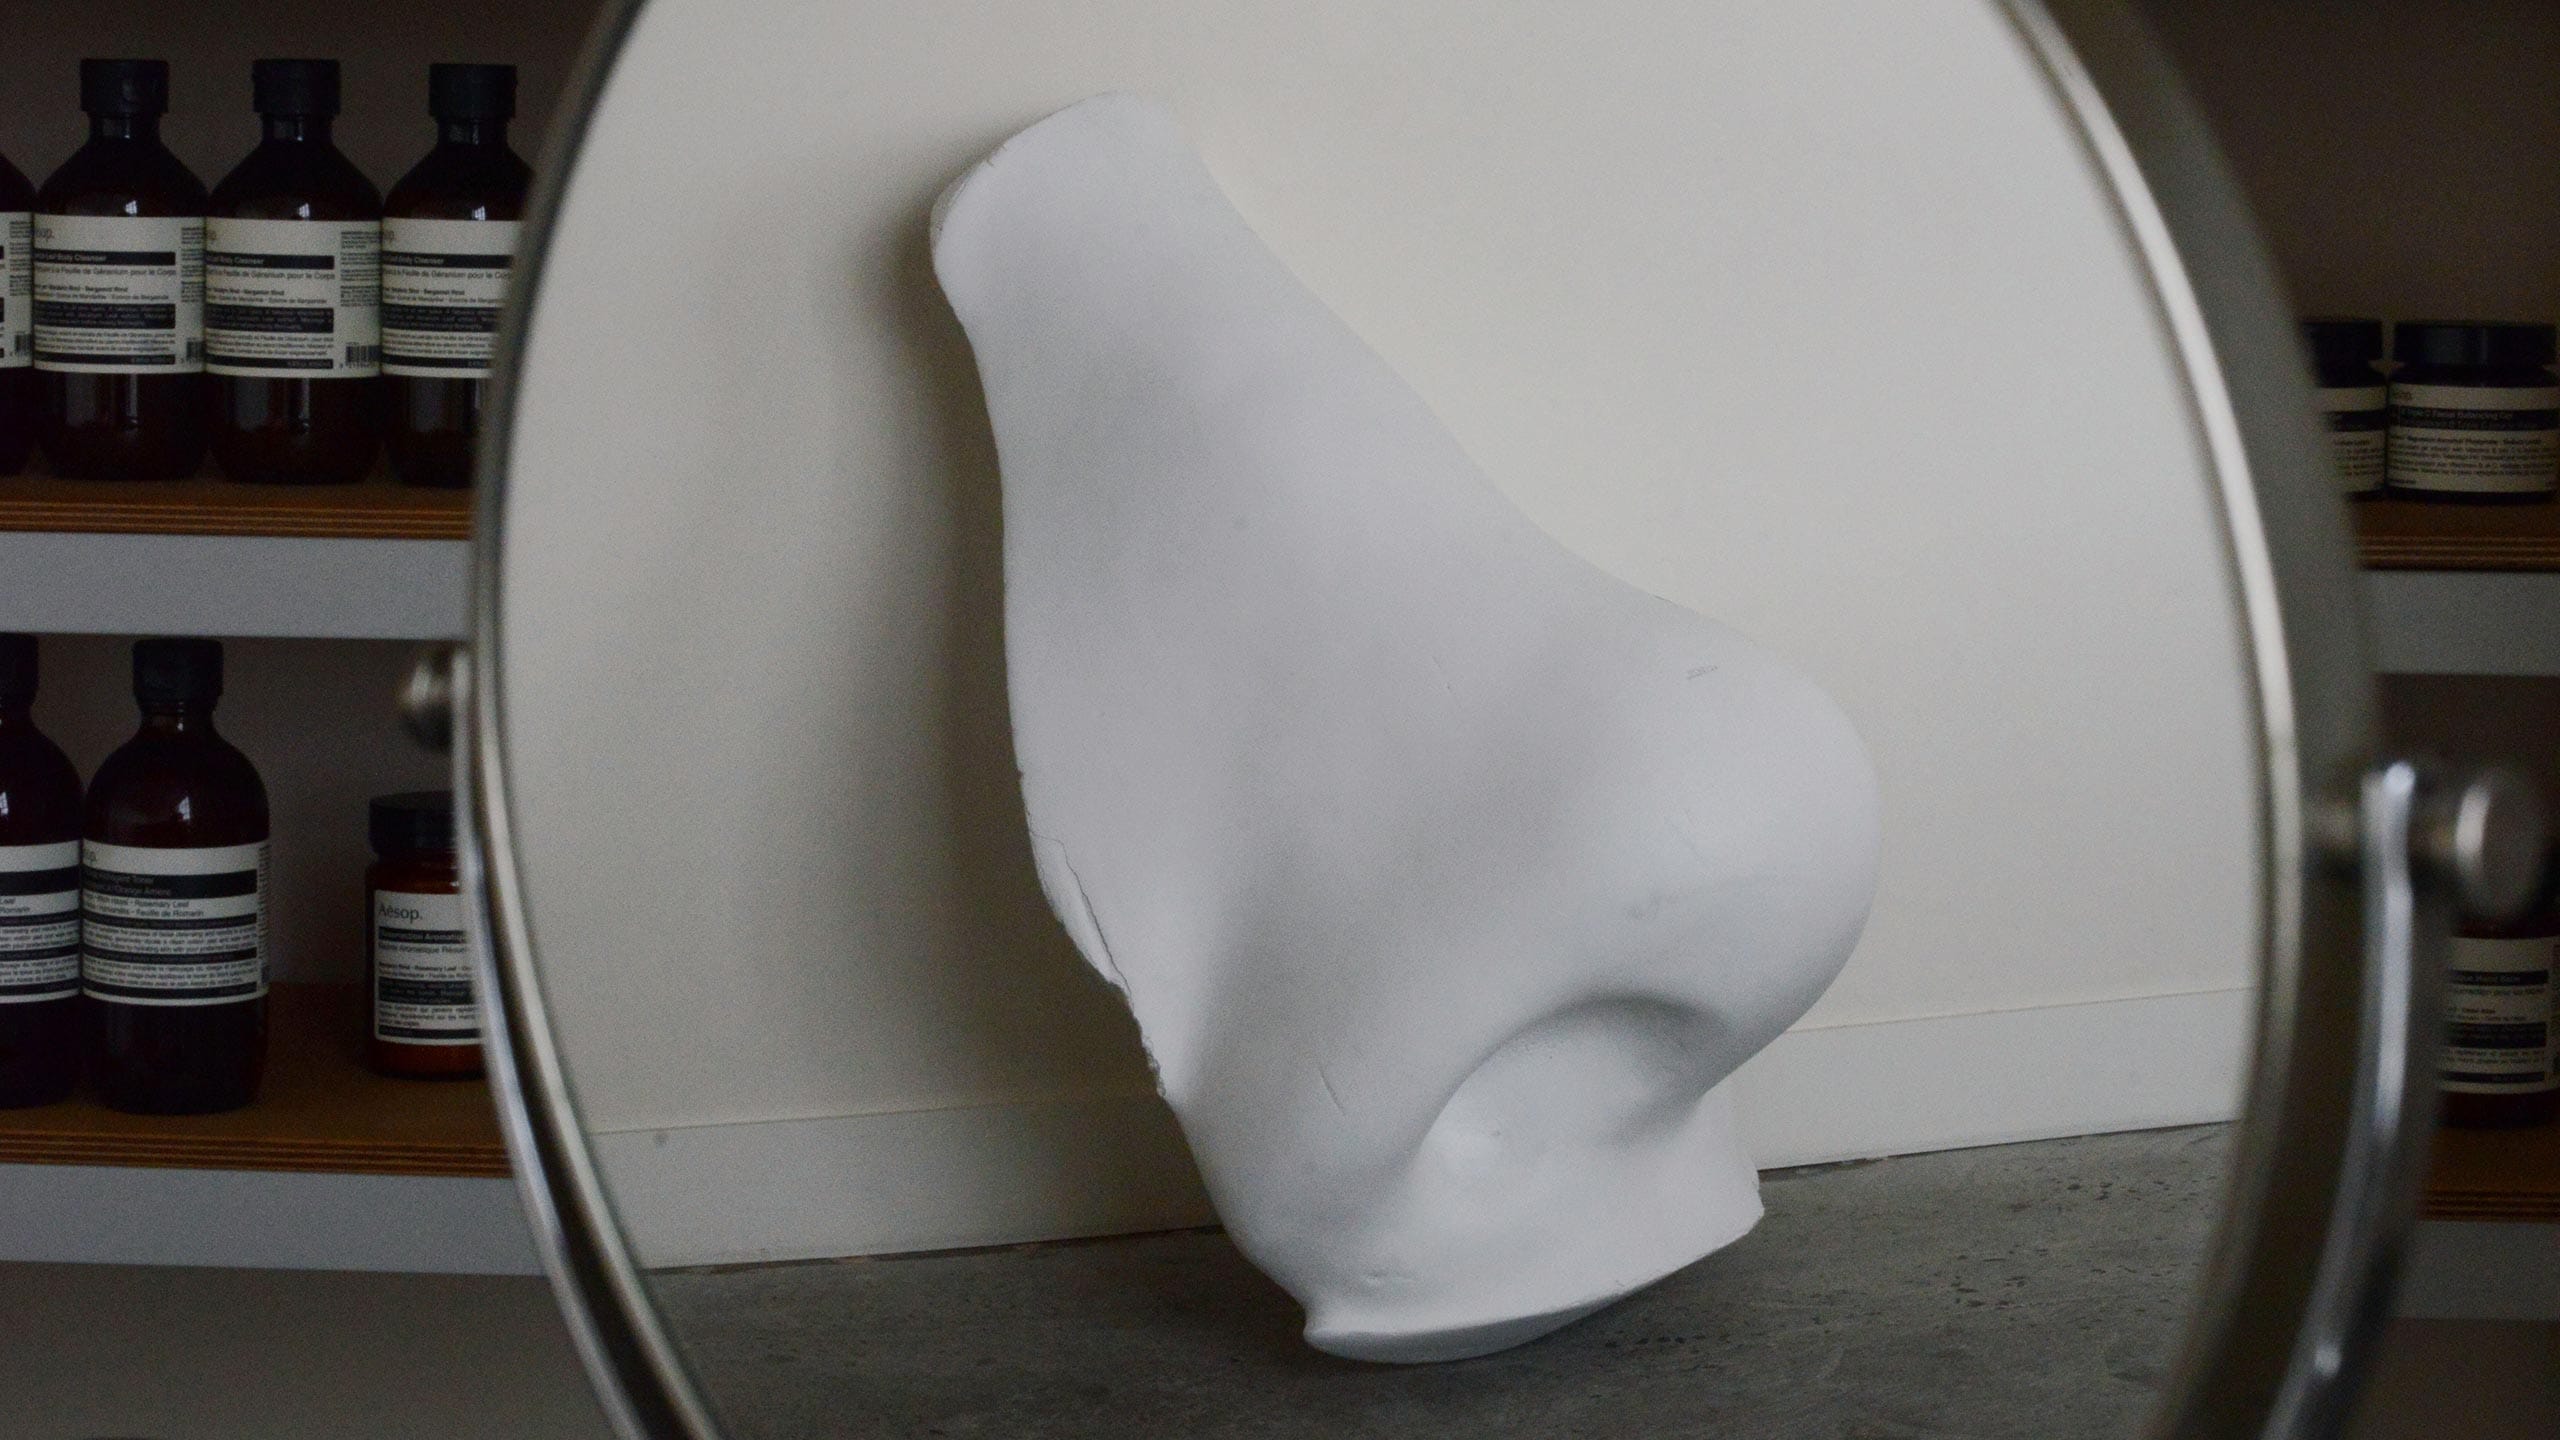 An outsized plaster nose leaned against a wall, as seen via a mirror reflection.